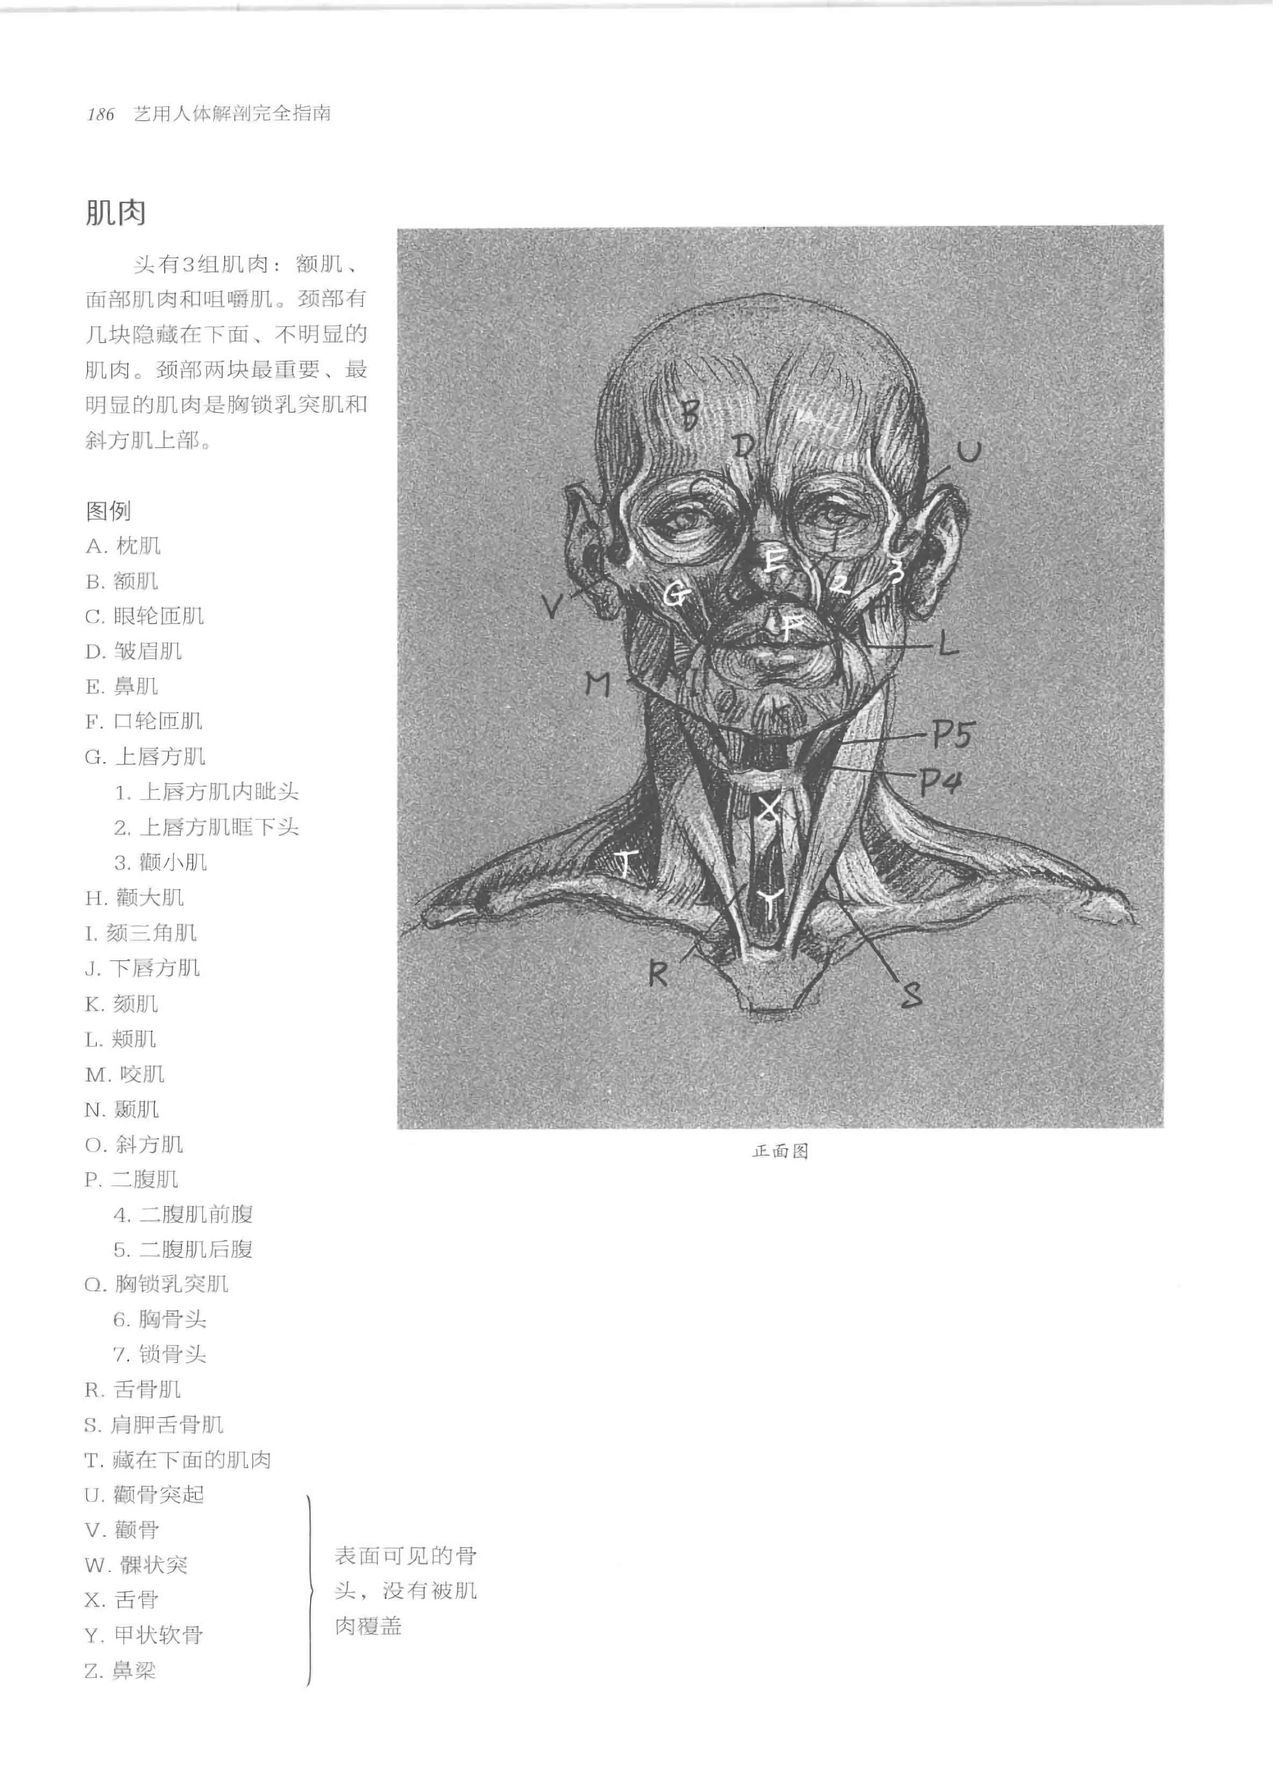 Anatomy-A Complete Guide for Artists - Joseph Sheppard [Chinese] 186